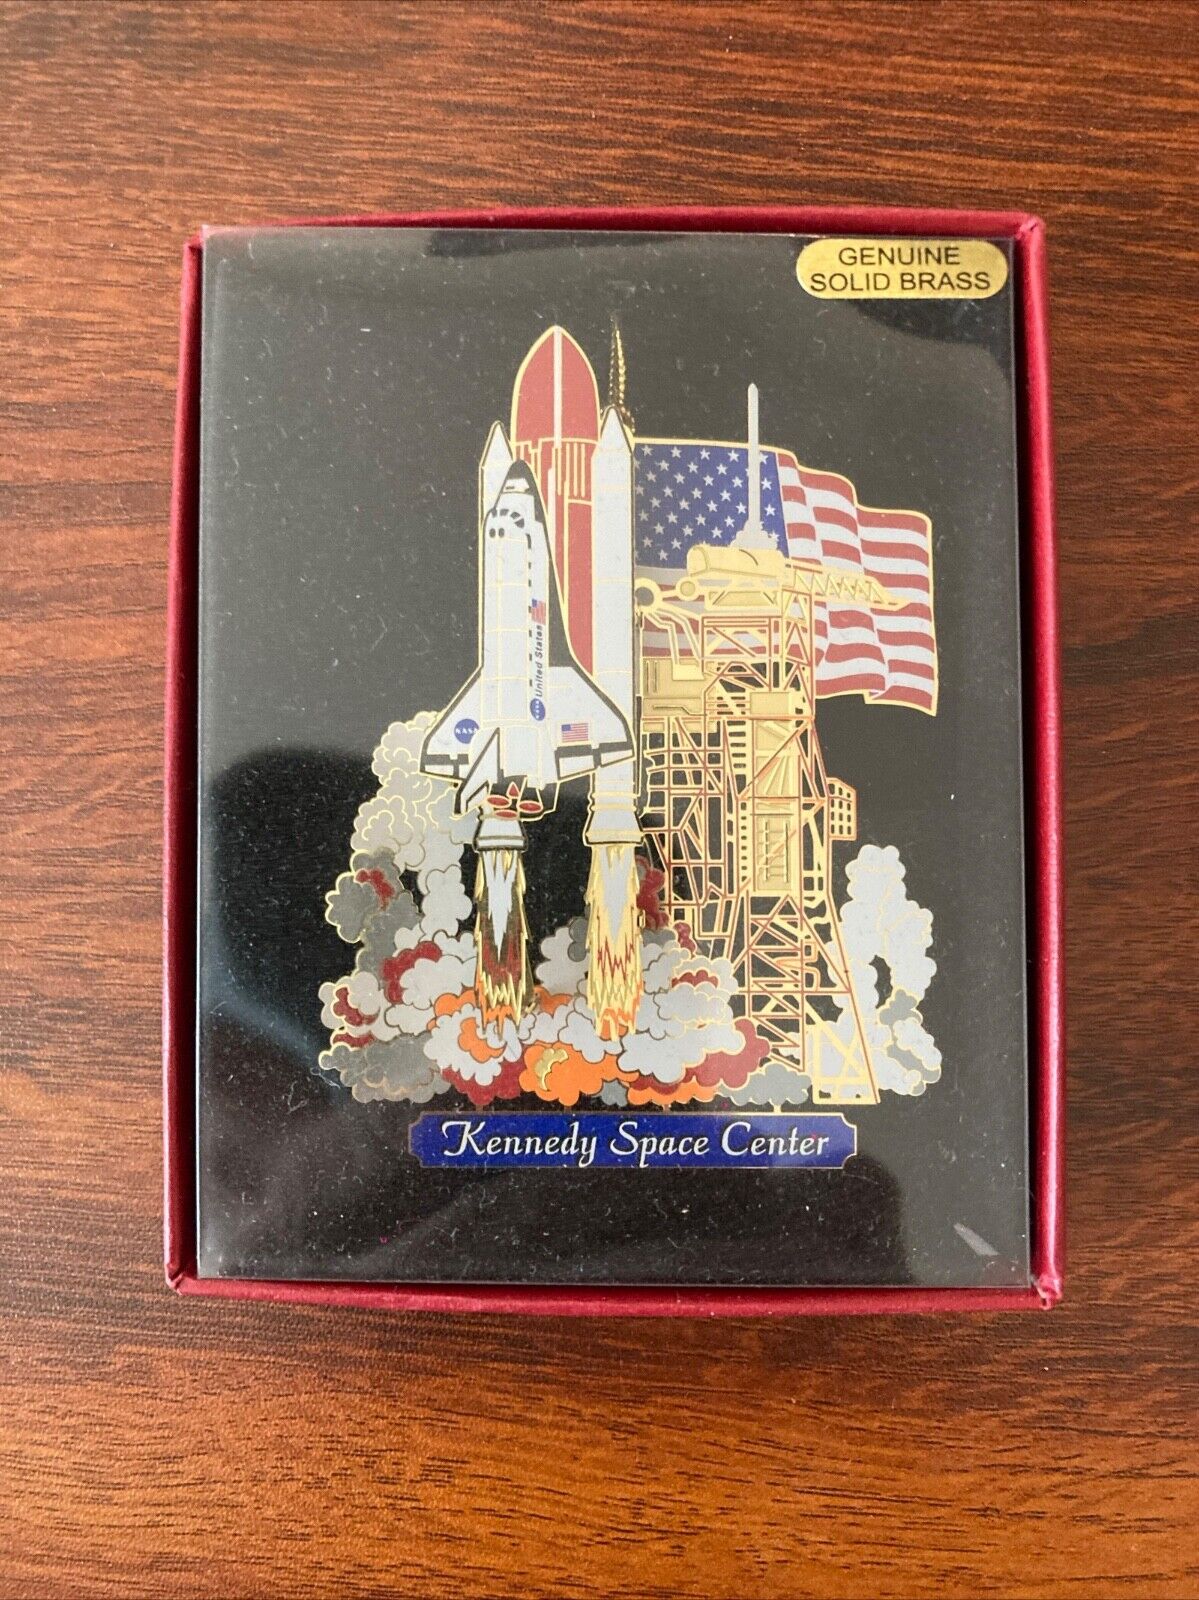 Kennedy Space Center Shuttle Launch Ornament Solid Brass 3D BRAND NEW